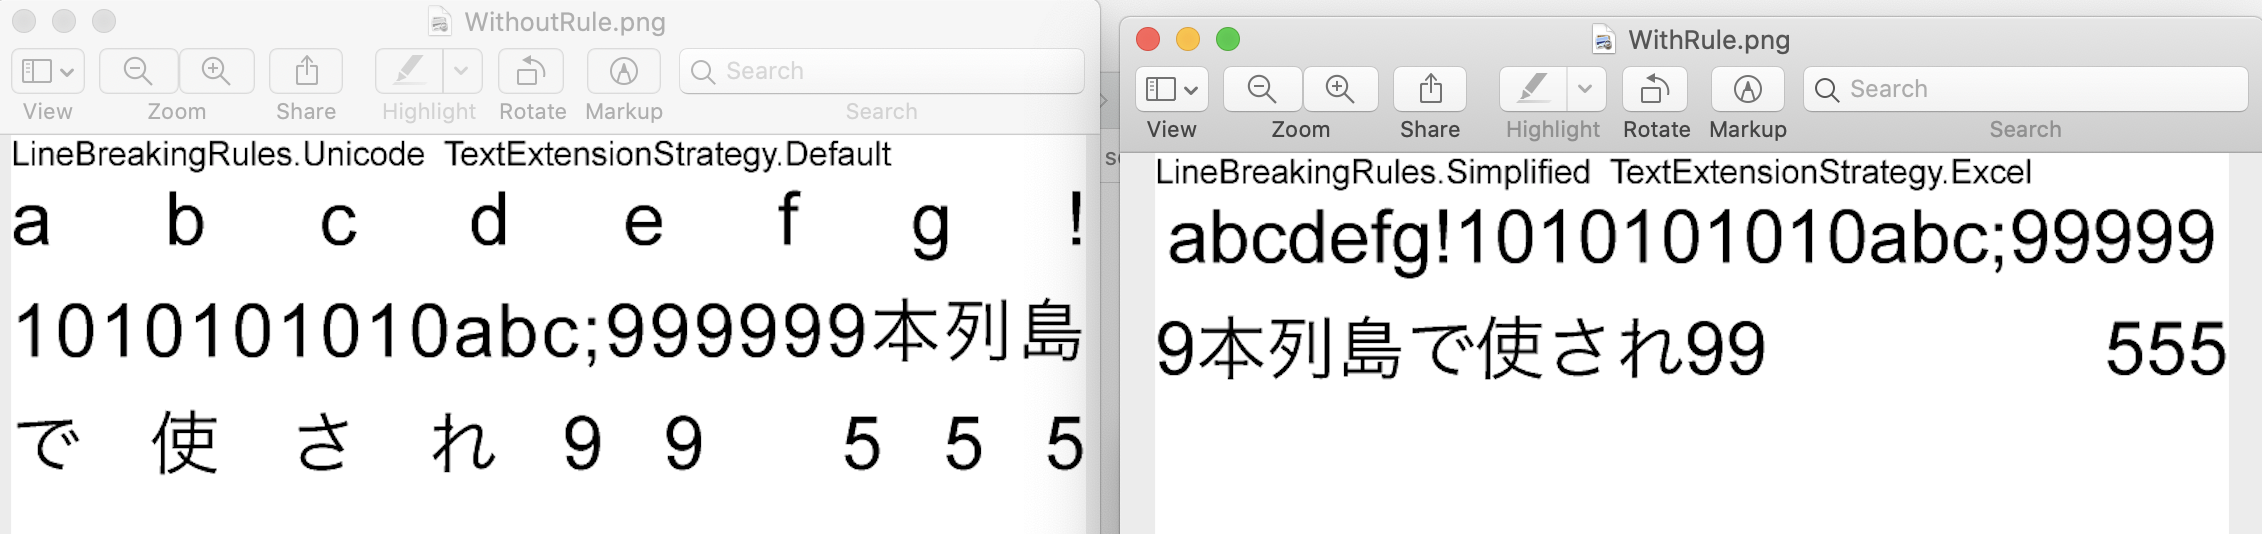 Text with simple and unicode LineBreakingRule